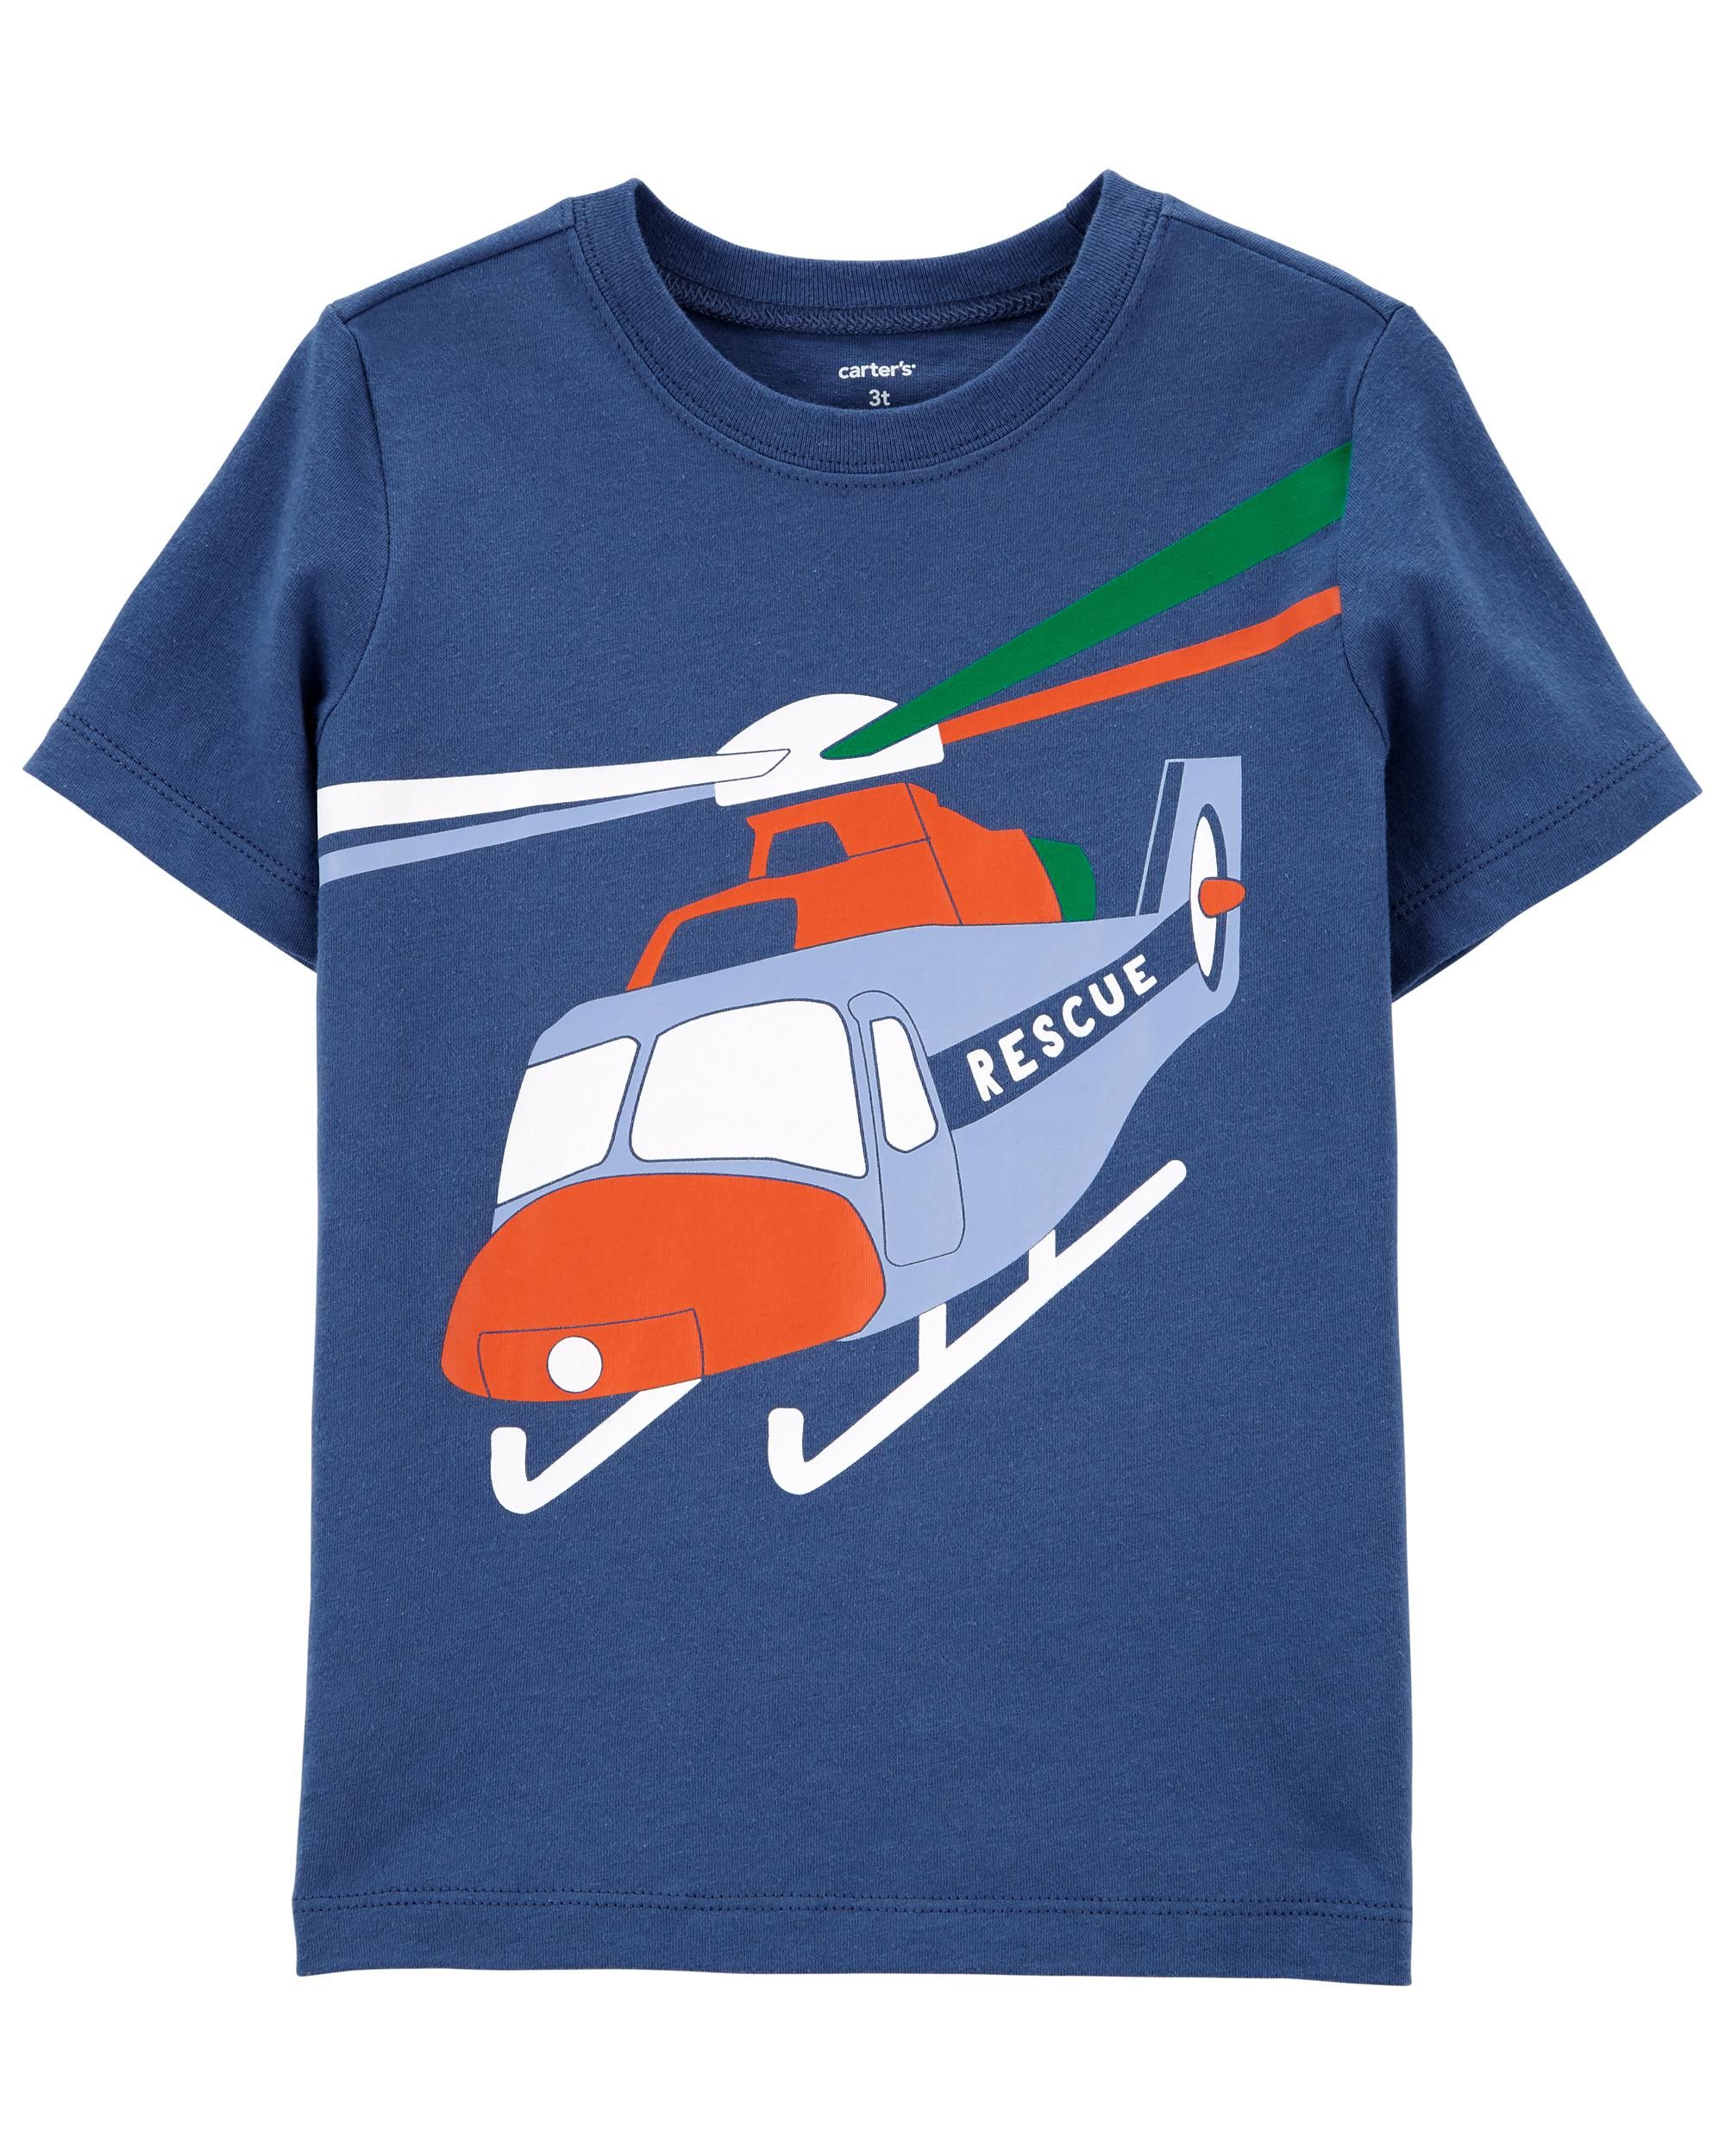 Helicopter Jersey Tee | Carter's